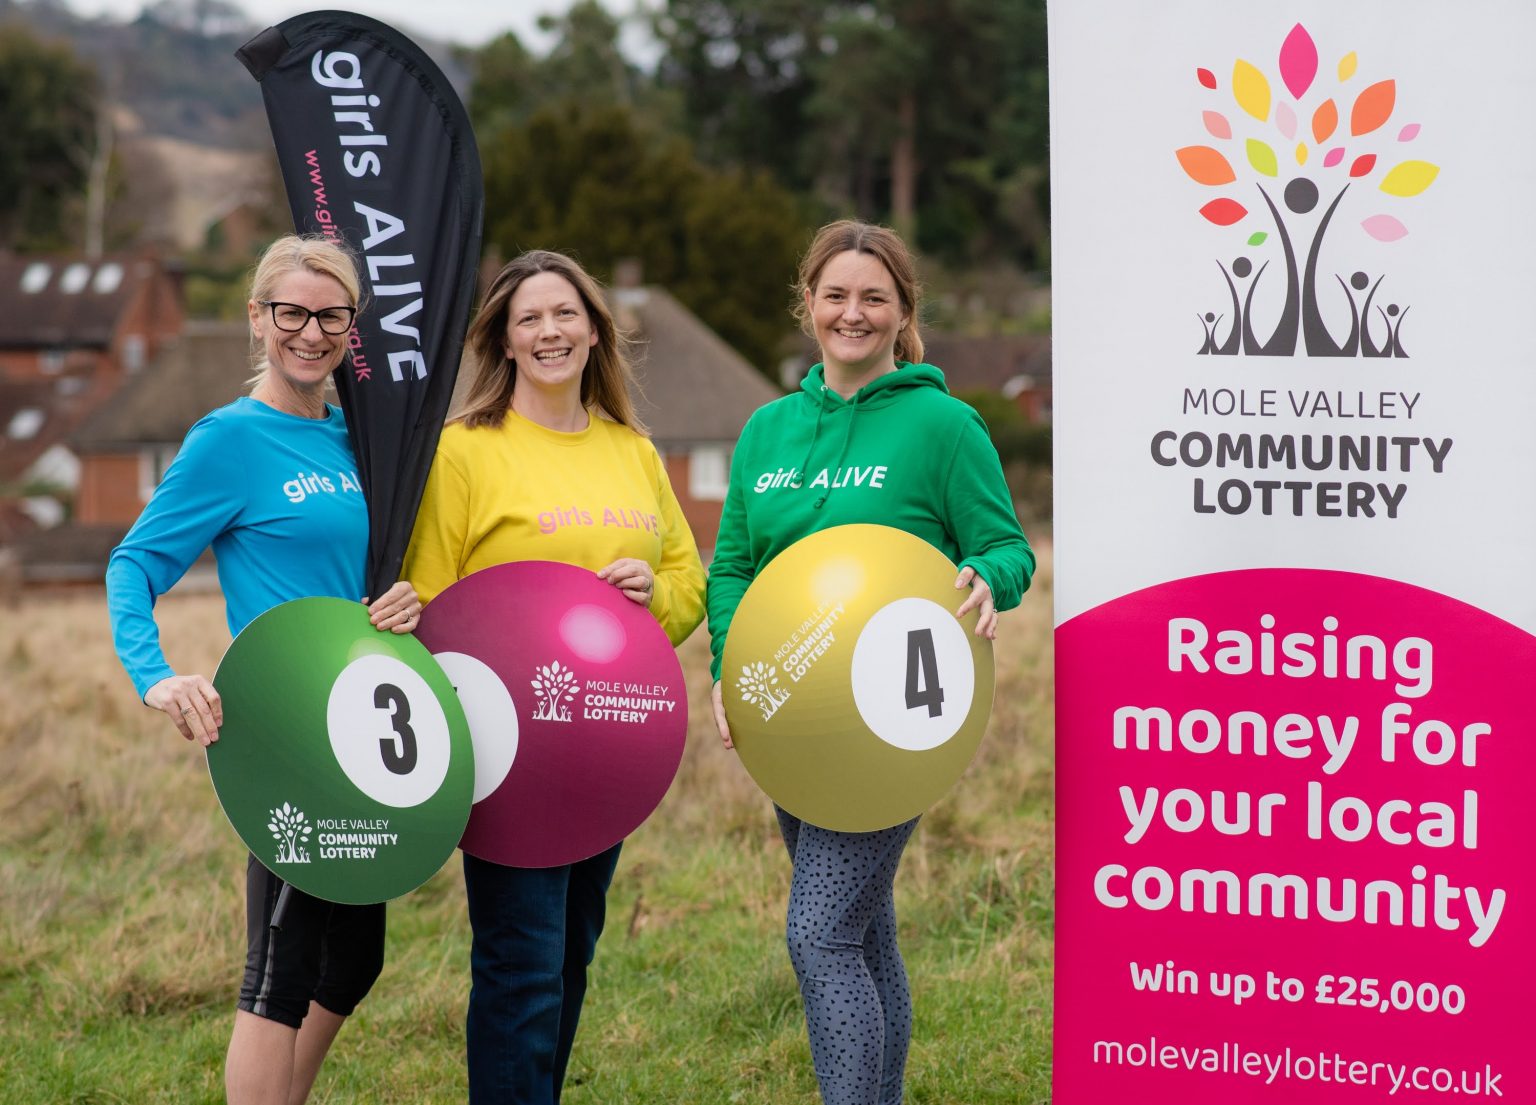 Three female representatives from Girls Alive standing with large Mole Valley Community Lottery balls.